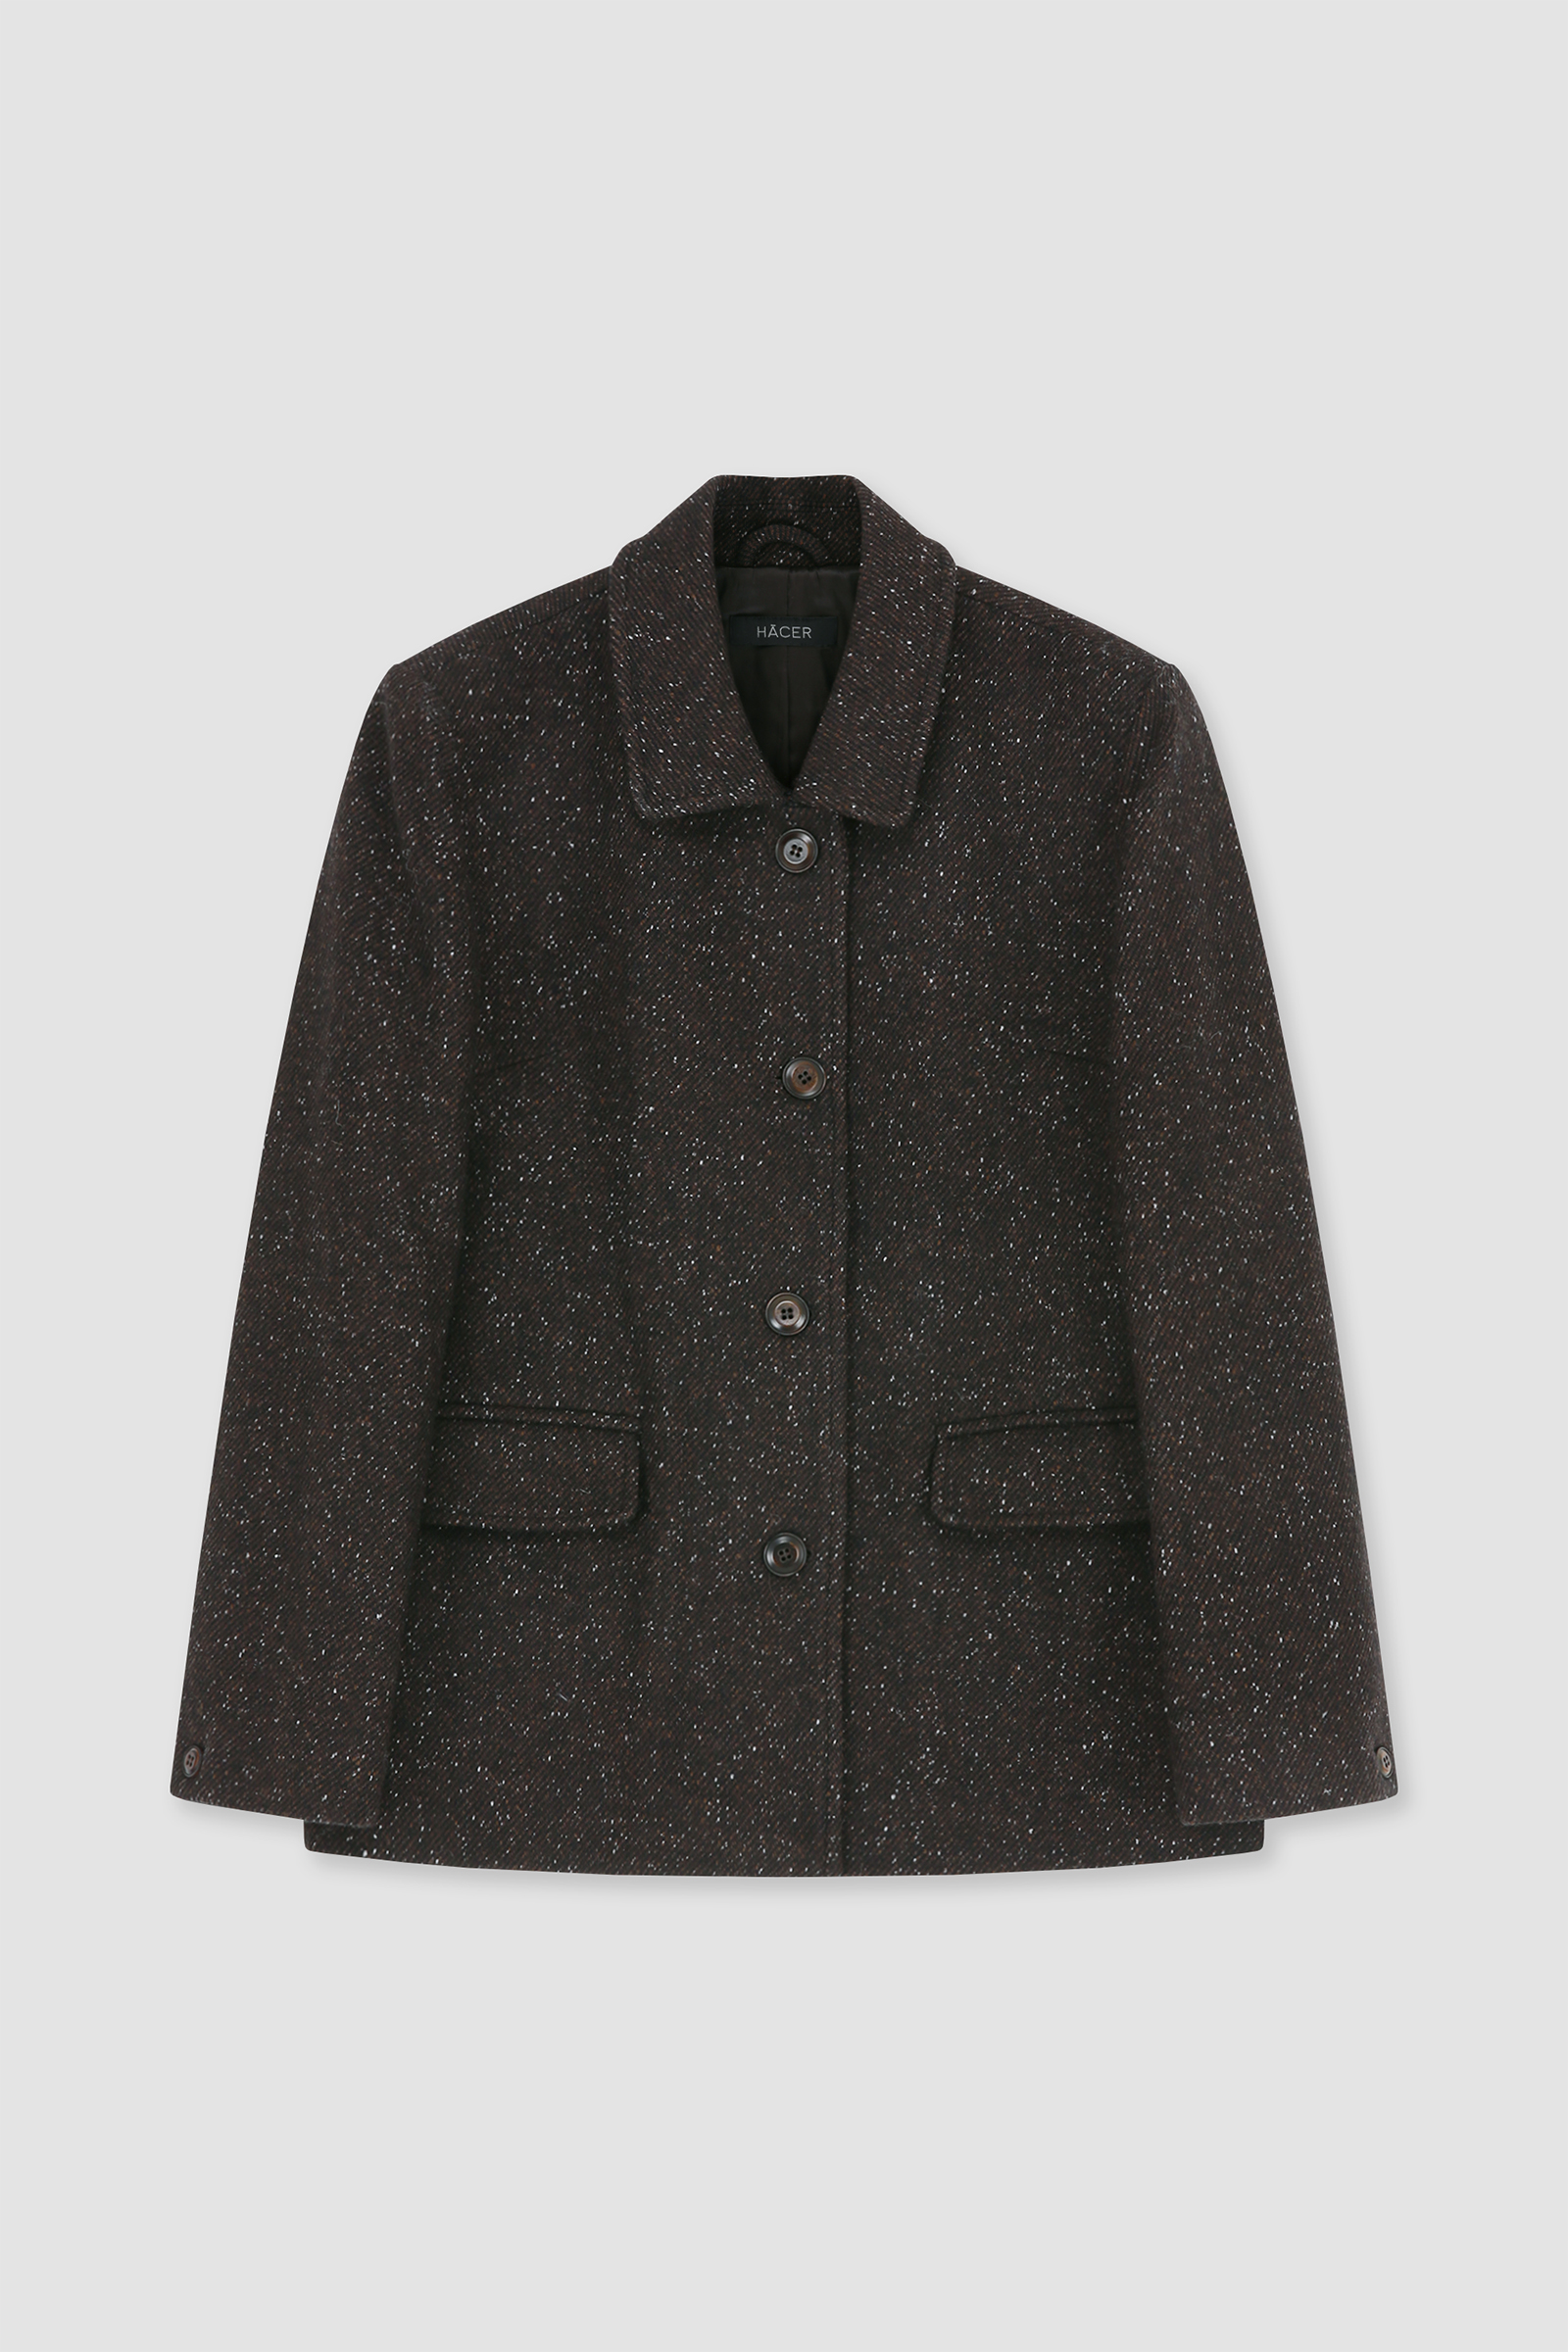 Classic 4 Button Wool Jacket